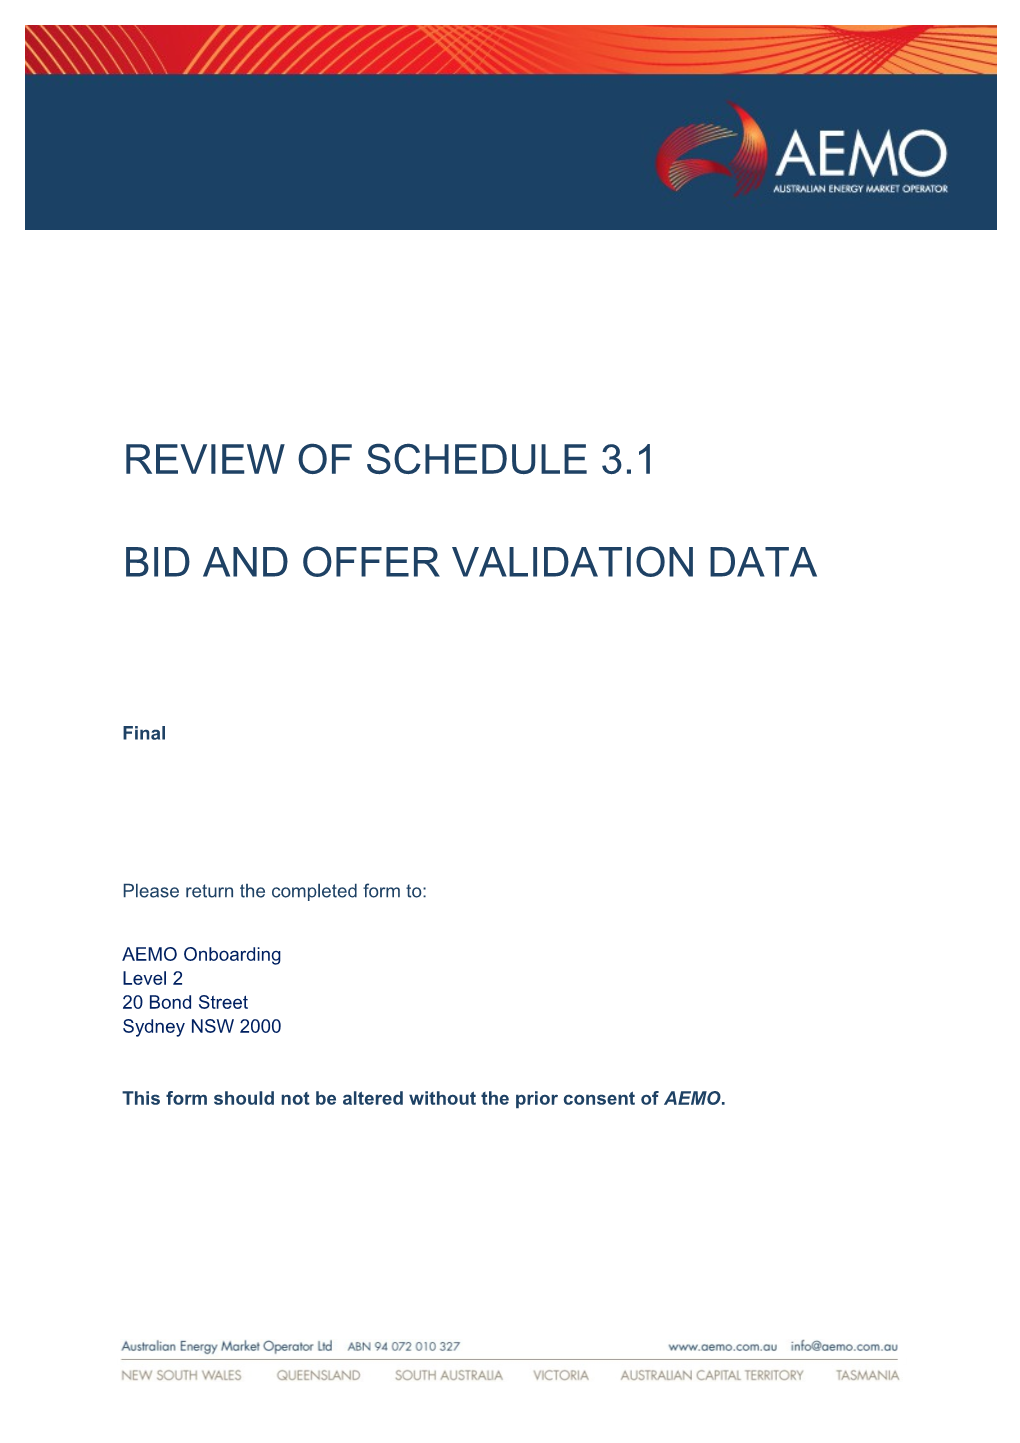 Review of Schedule 3.1 - Bid and Offer Validation Data